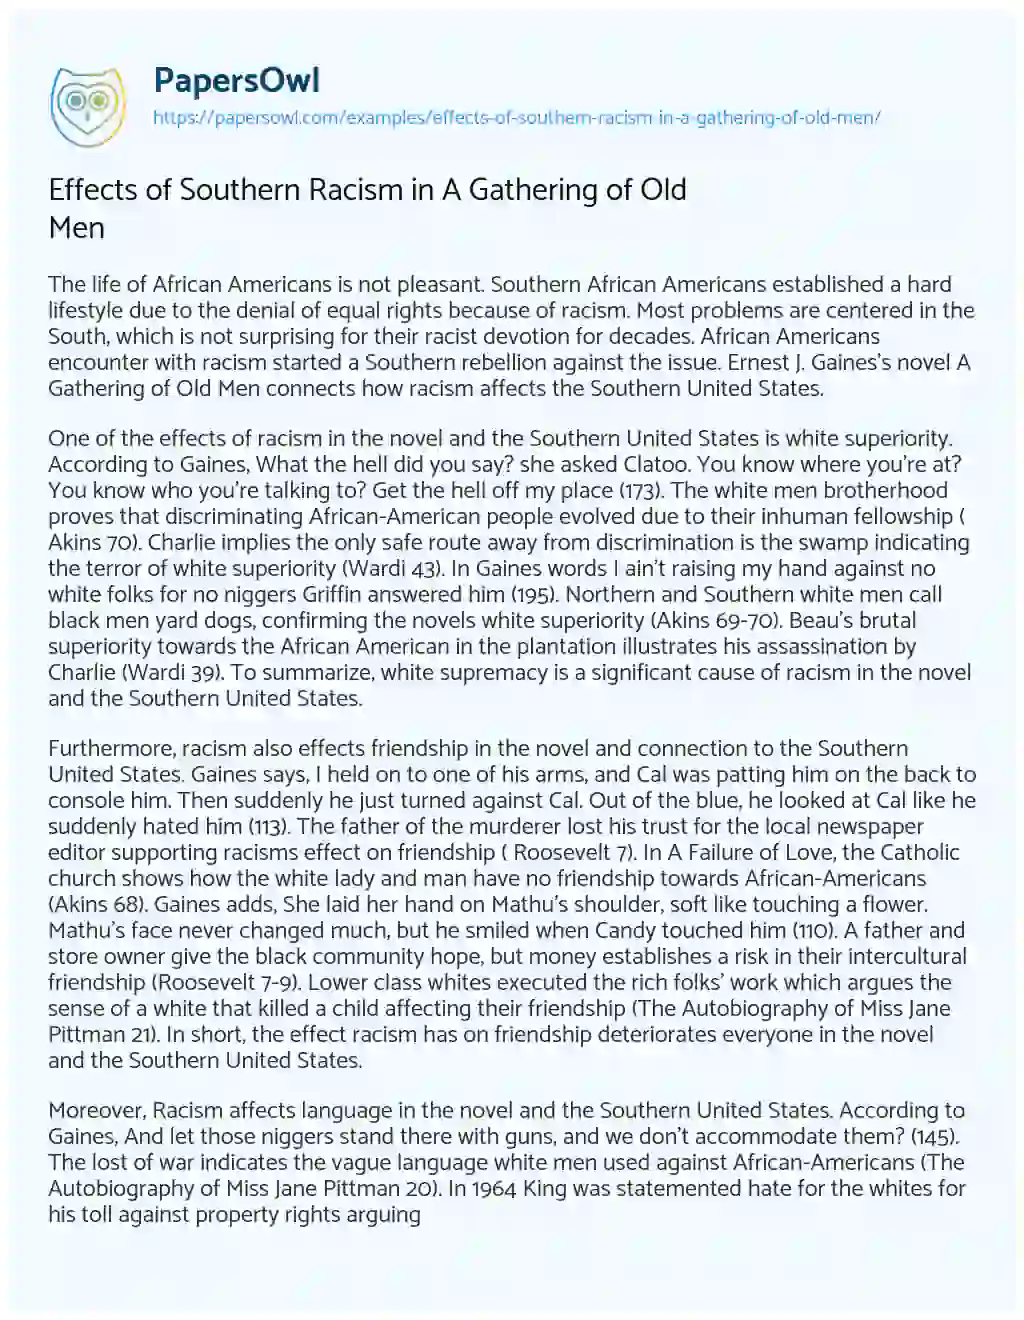 Essay on Effects of Southern Racism in a Gathering of Old Men